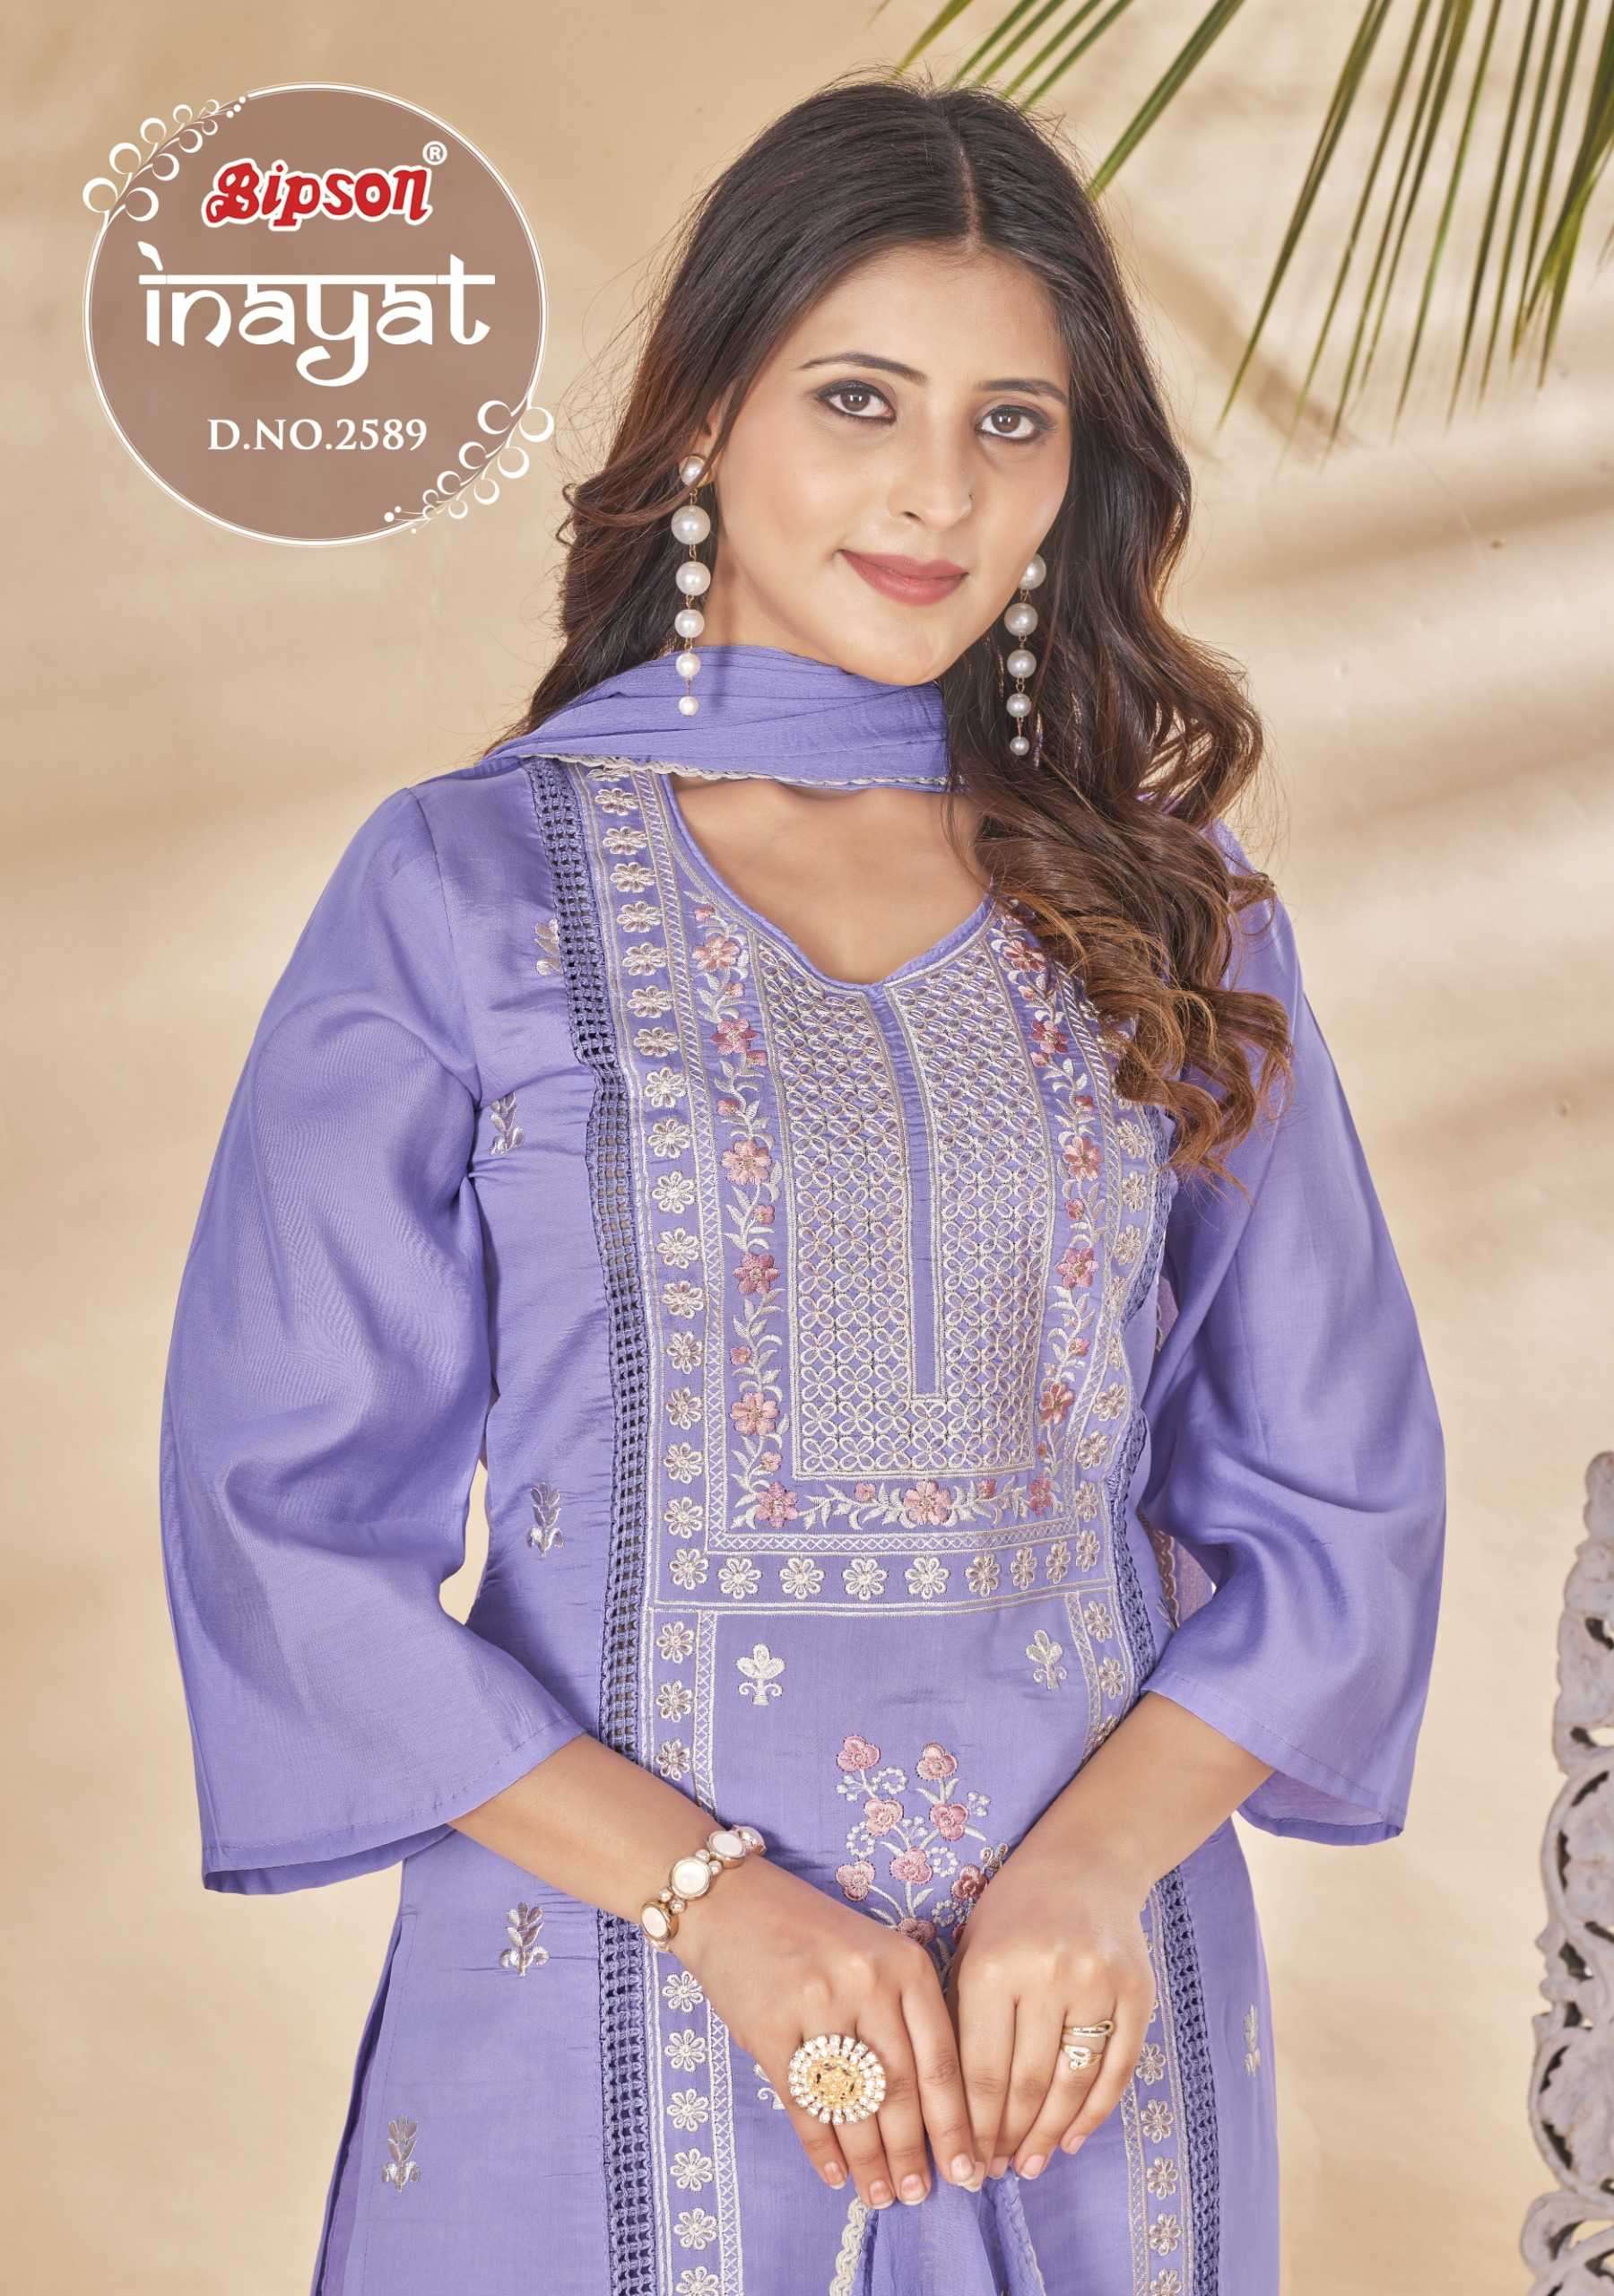 bipson inayat 2589 Pure Roman Silk With Heavy Embroidery Work suit